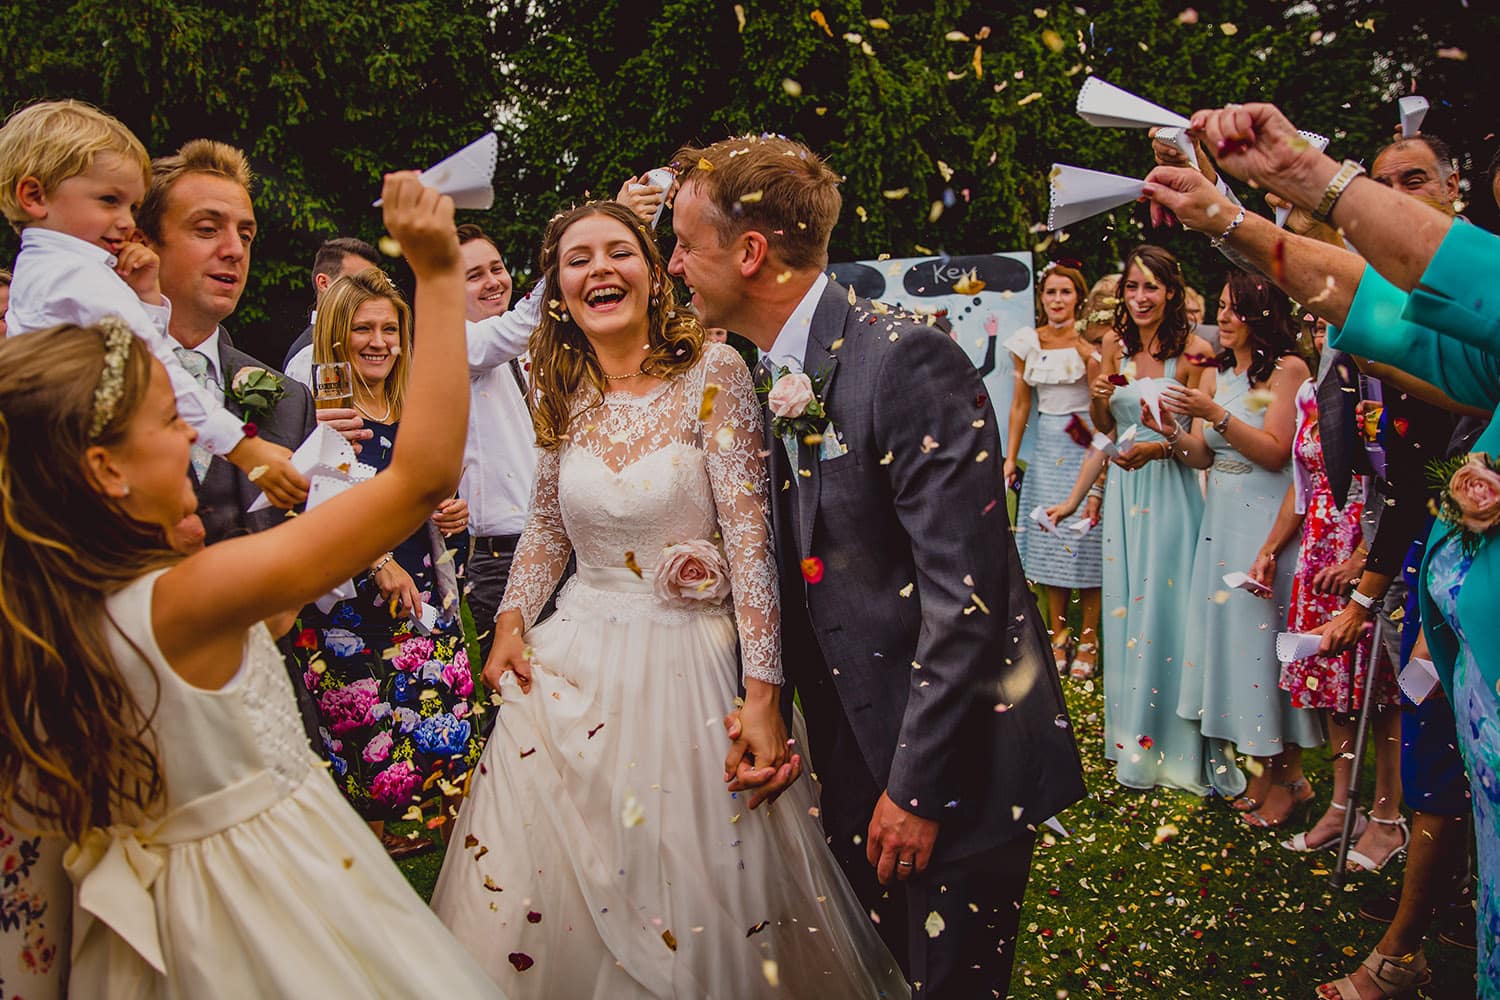 Confetti – A Midlands Wedding Photographer’s Guide!